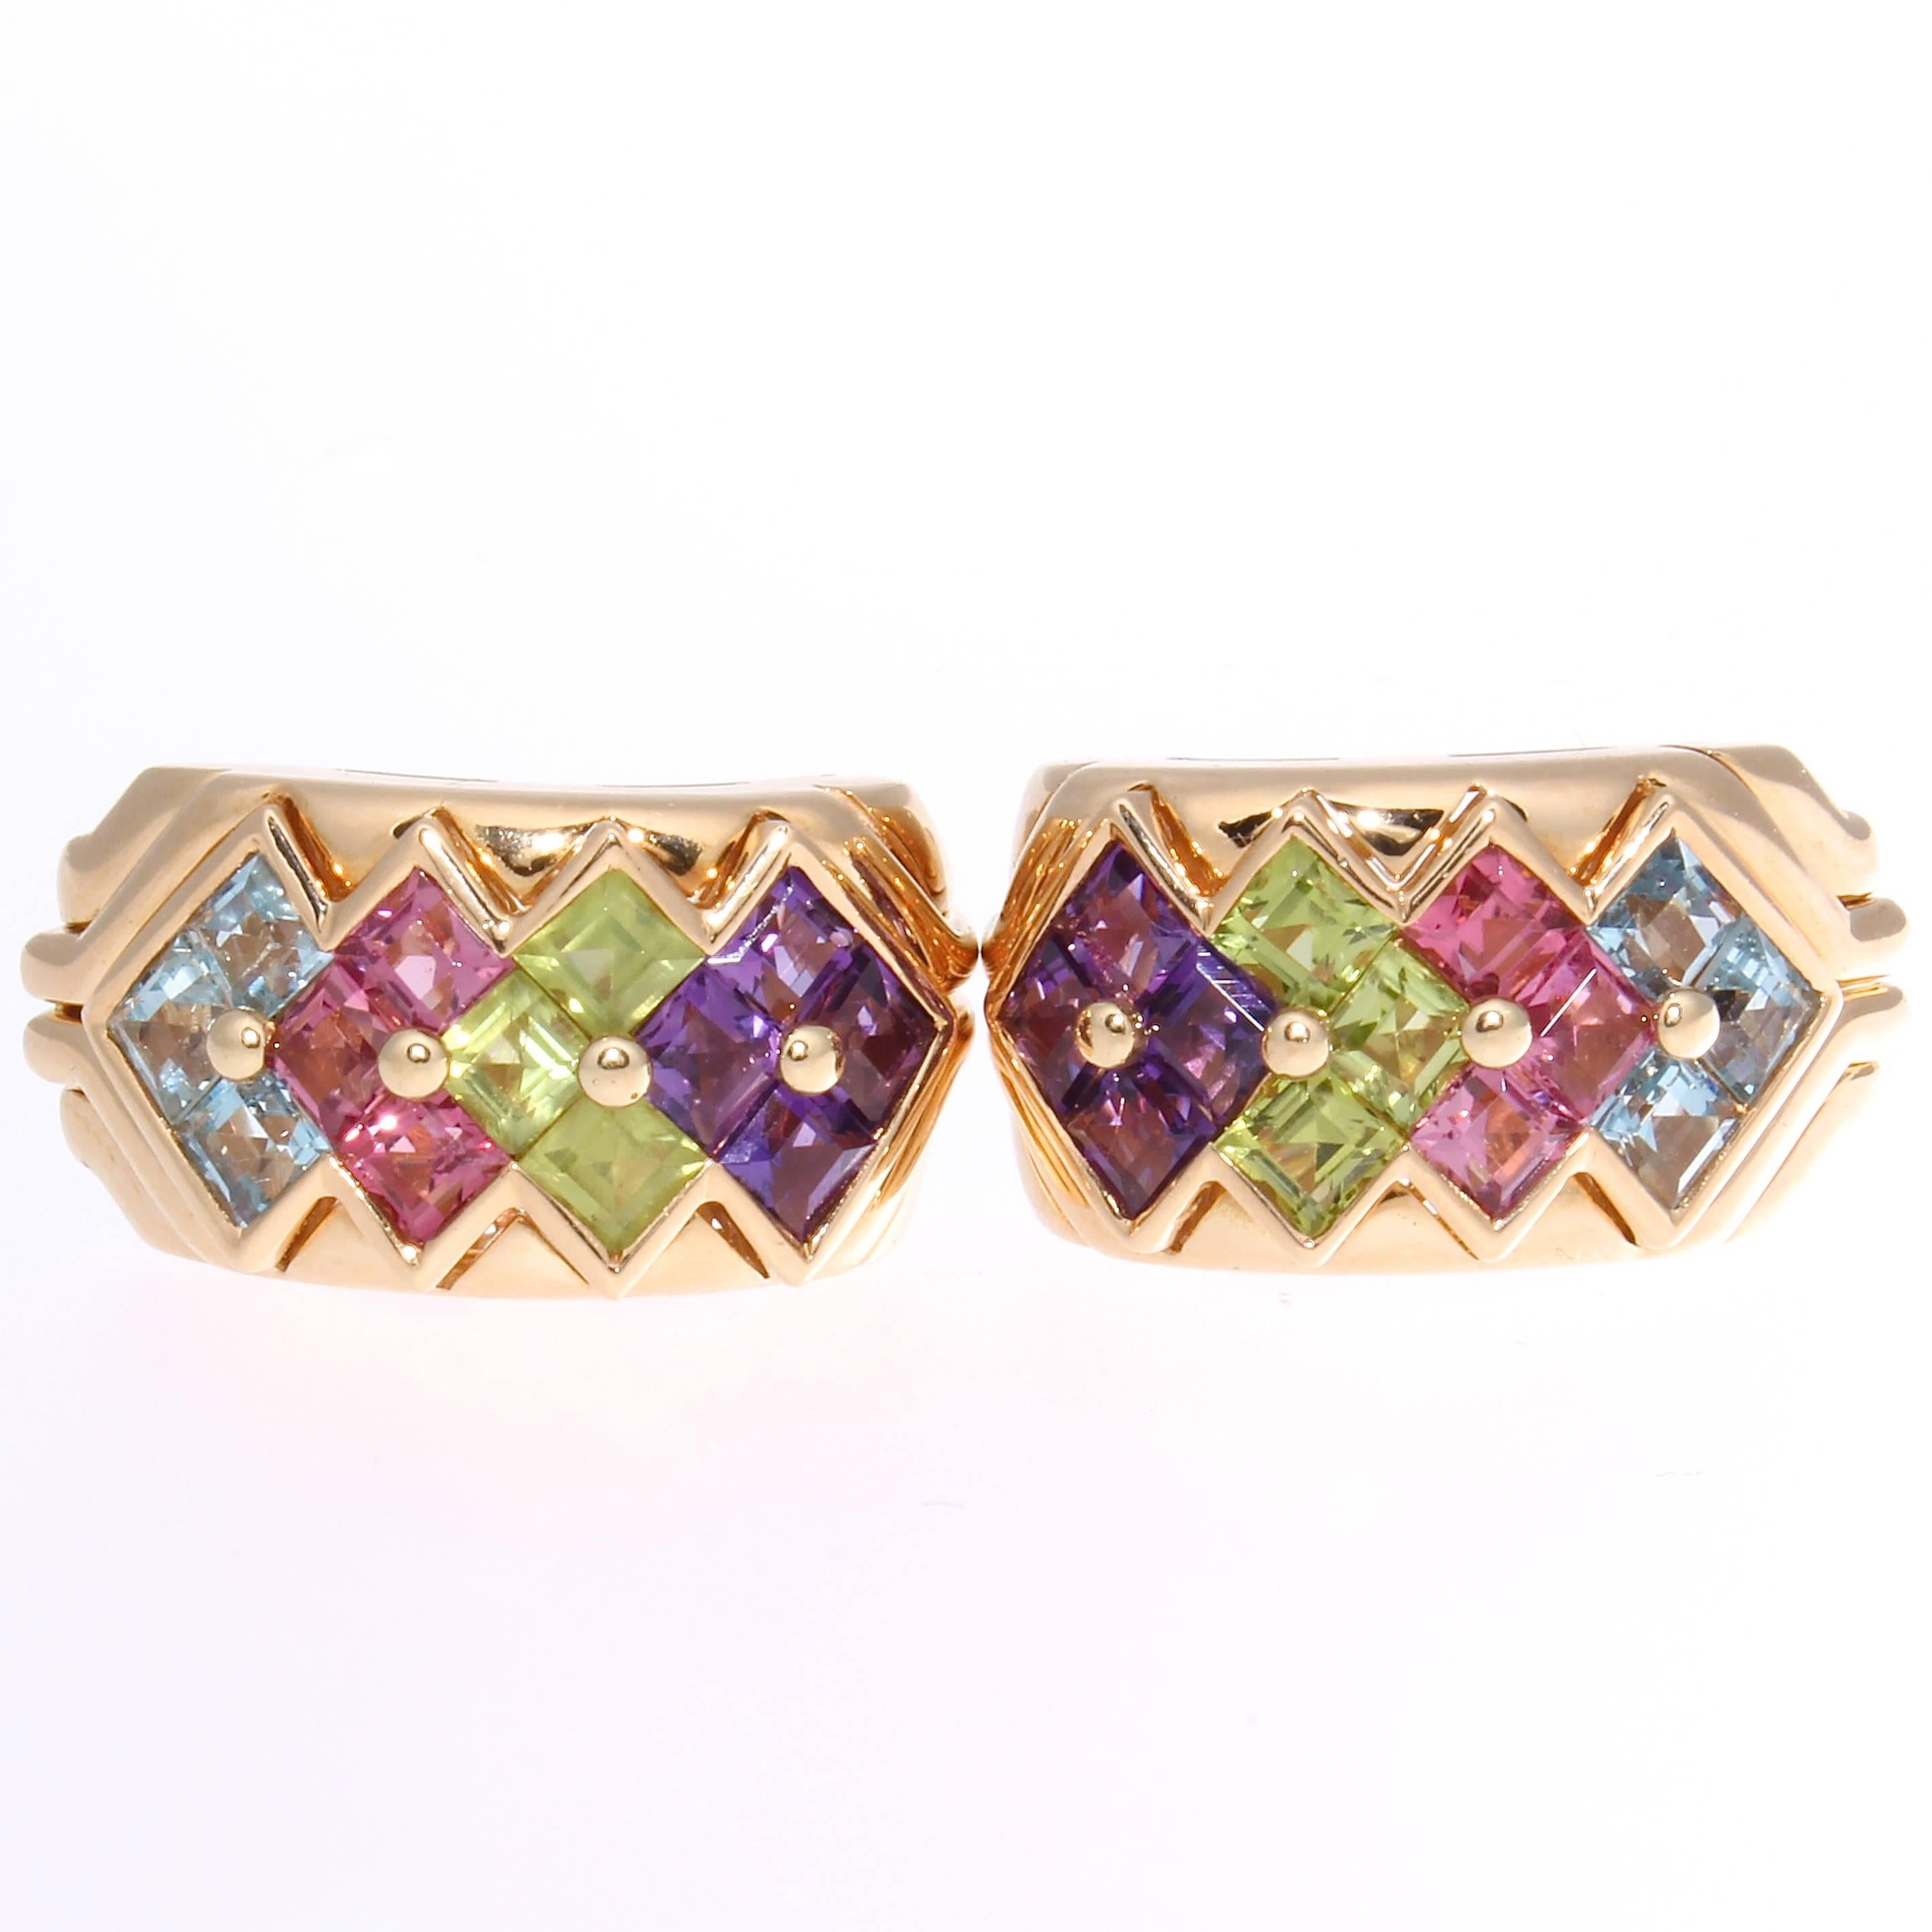 An entrancing color display from the fashion forward thinking designers at Bulgari. Created with multiple square cut purple amethyst, green peridot, pink tourmaline and blue topaz. Crafted in fine Italian 18k yellow gold.

The dimensions are 1